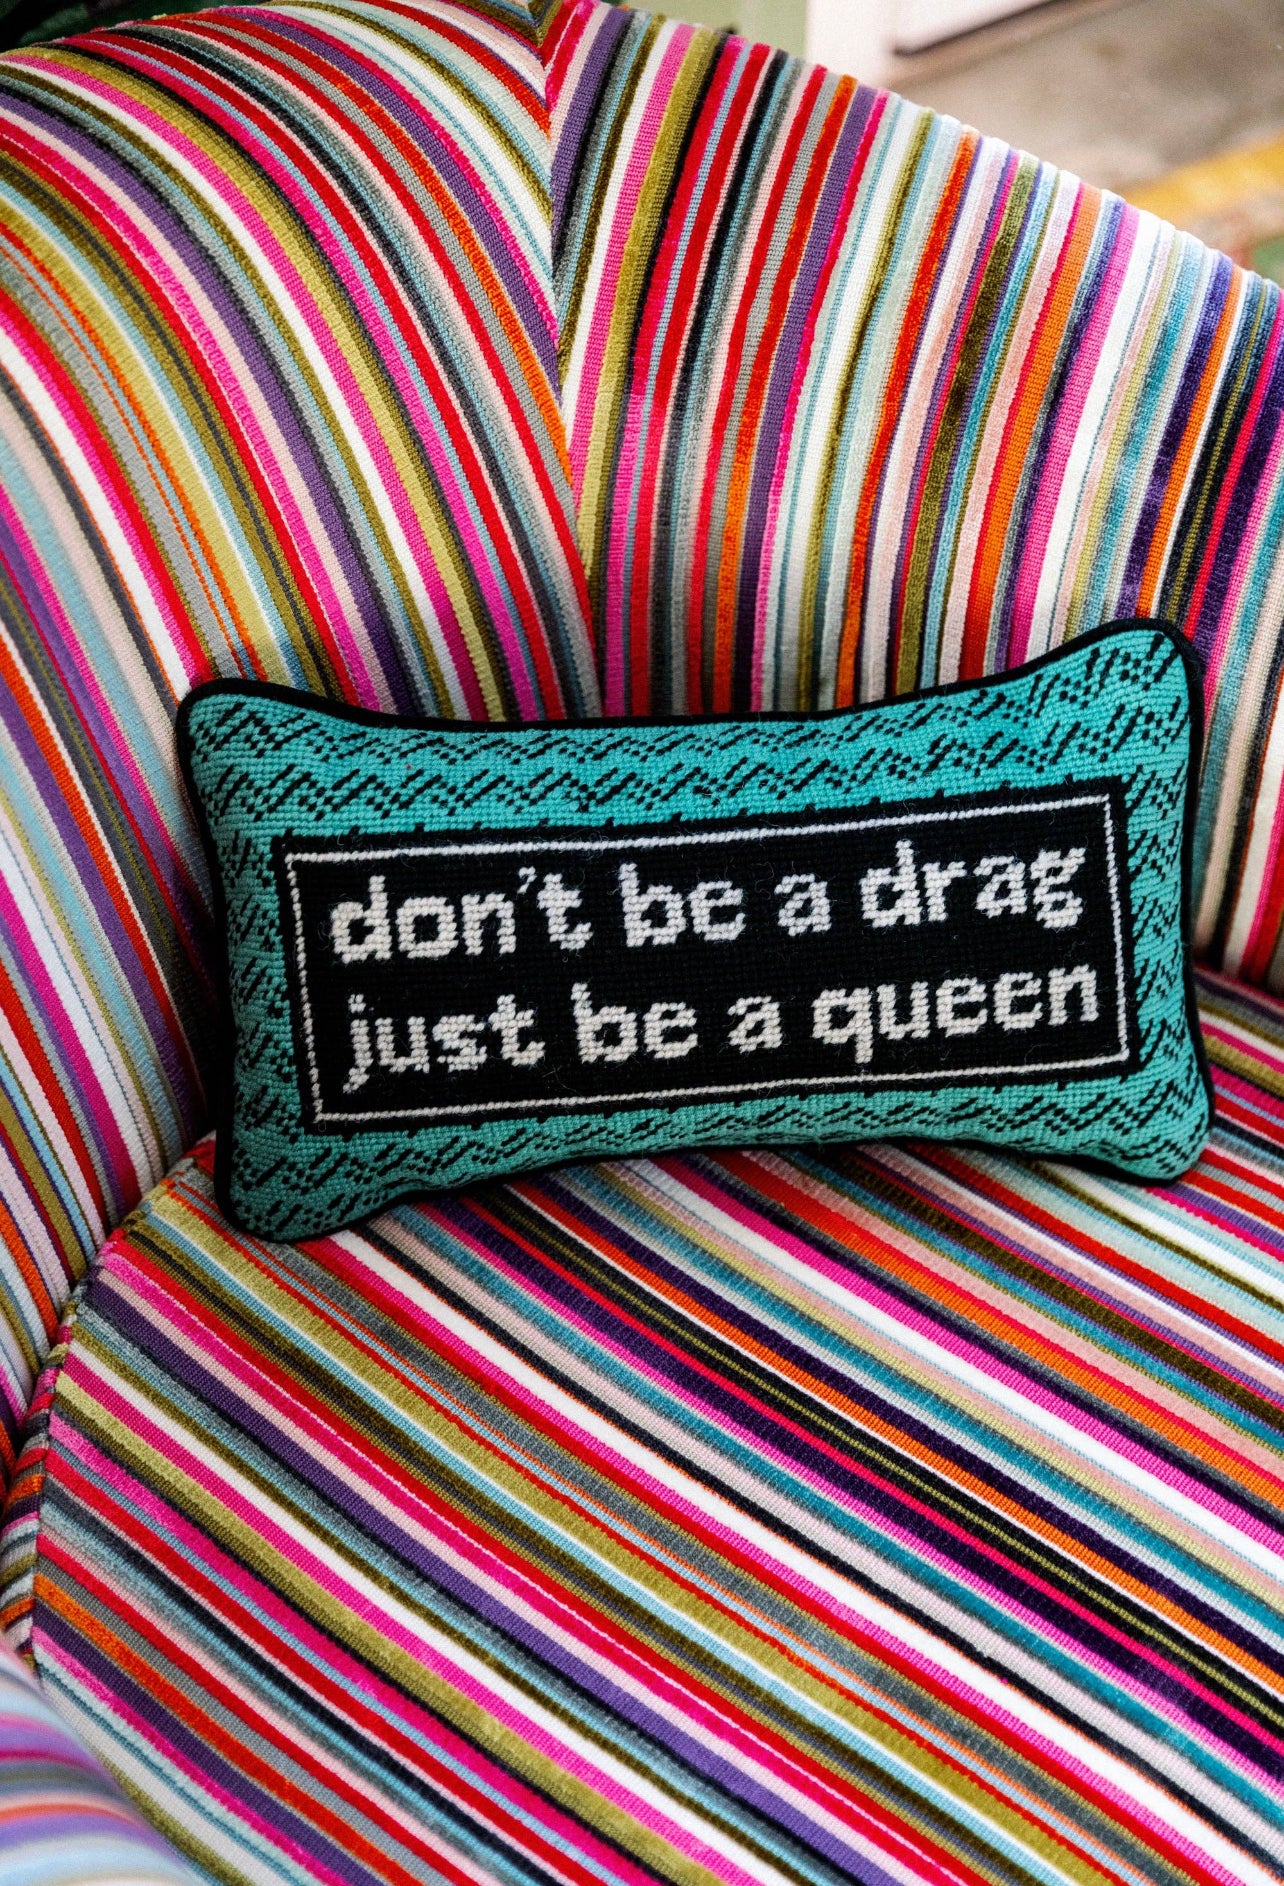 Don’t be a Drag Needlepoint Pillow